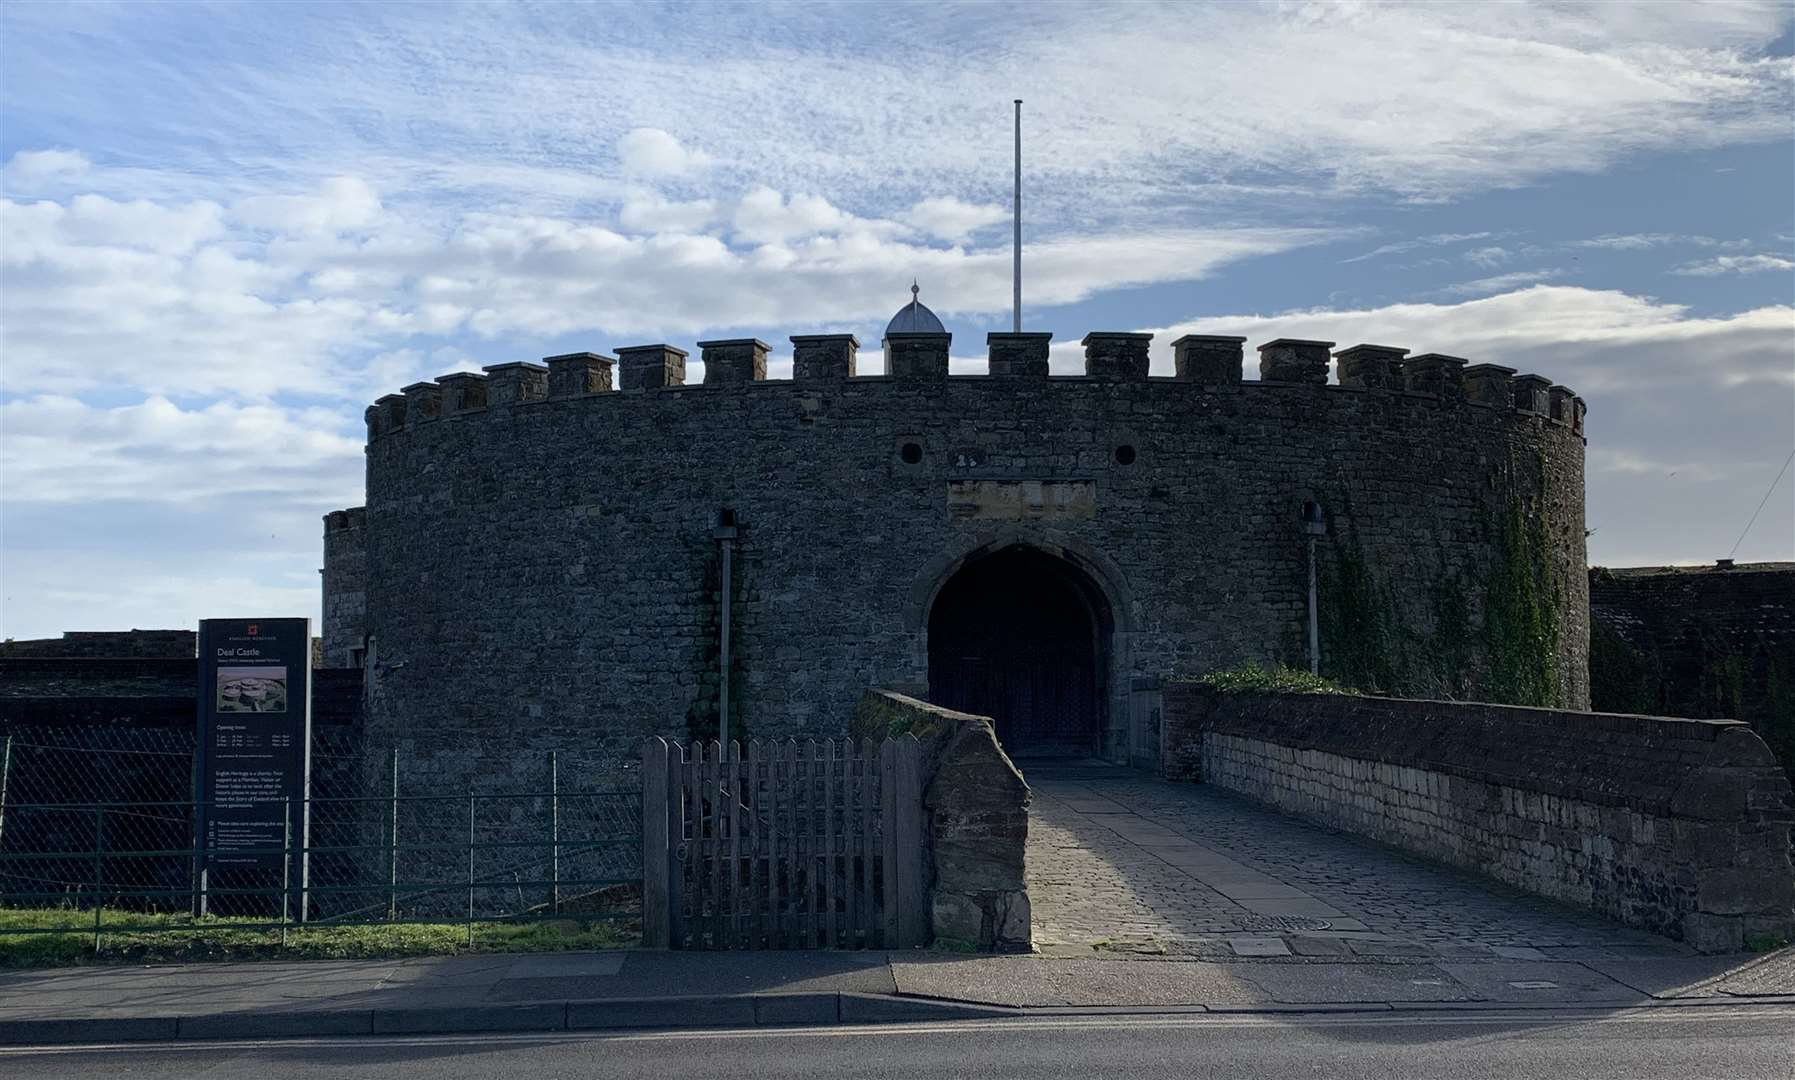 Visitors are welcome at Deal Castle